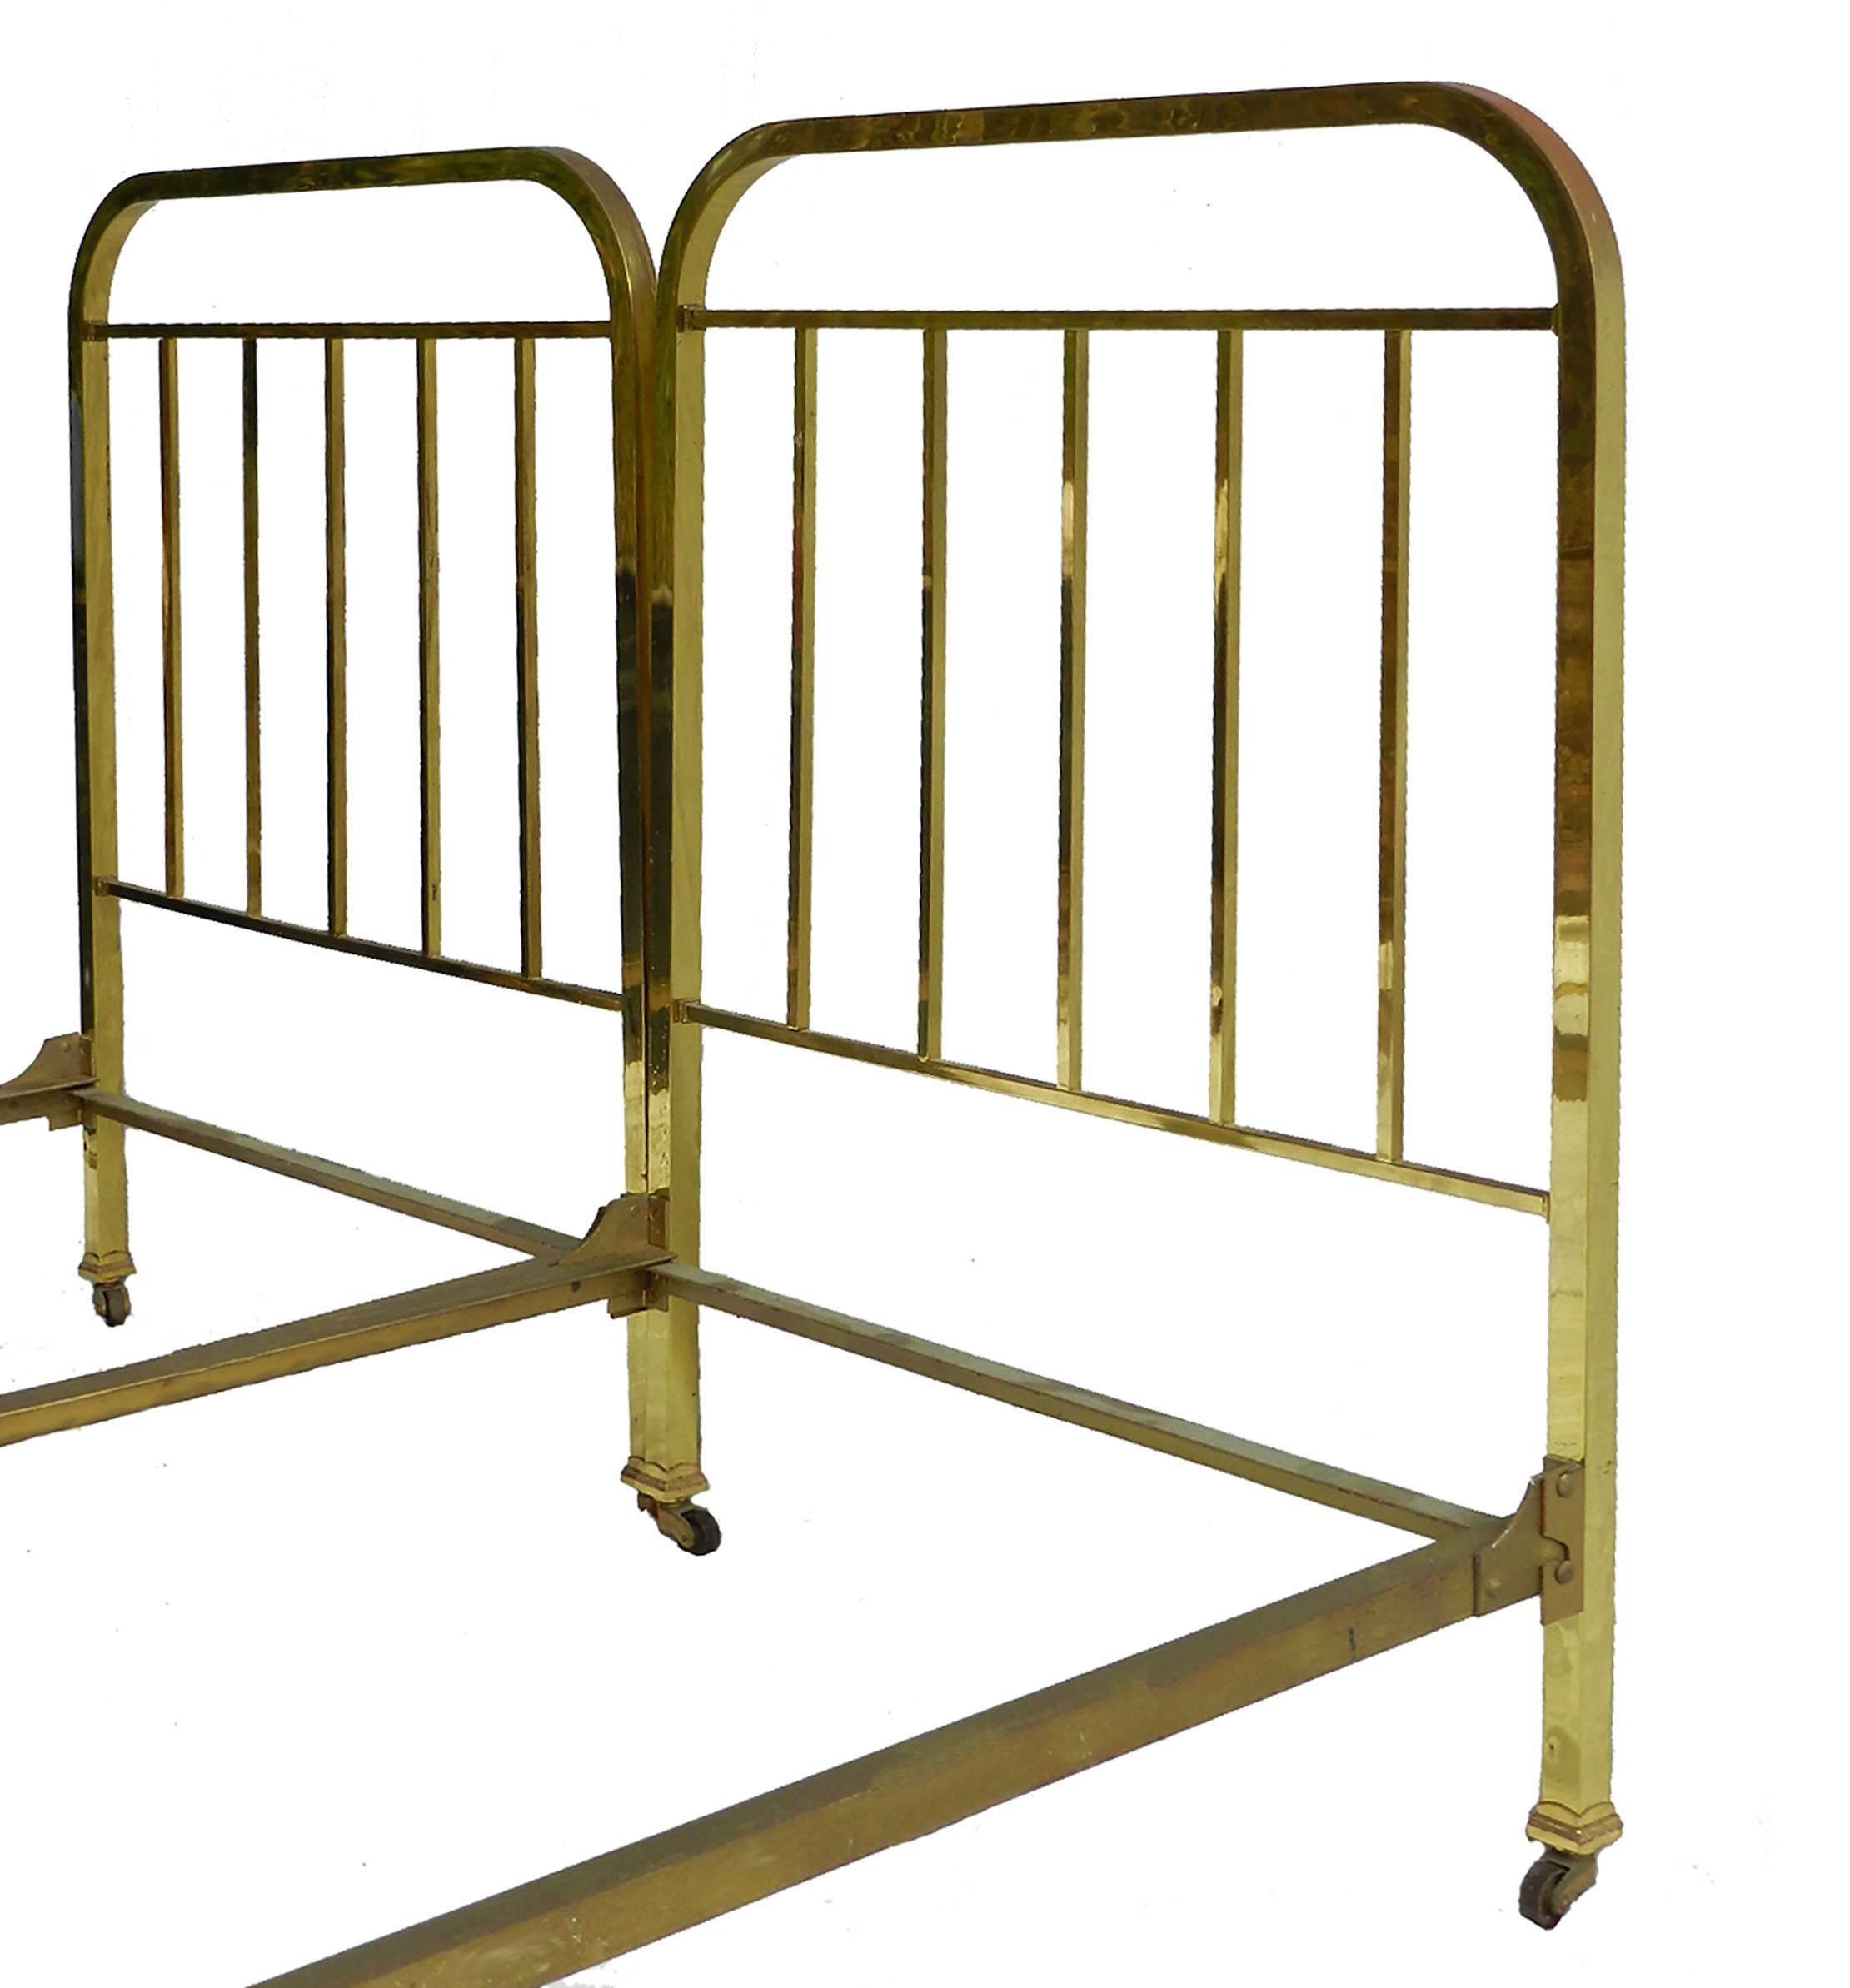 Pair of Art Deco brass beds French antique single twin beds, circa 1930
With original makers label. Literie Darrac 24 Rue Cadet 24 Paris
Shiny and reflective hard to show in photos
Hollow brass bed frames with good original patina
Can be re-polished